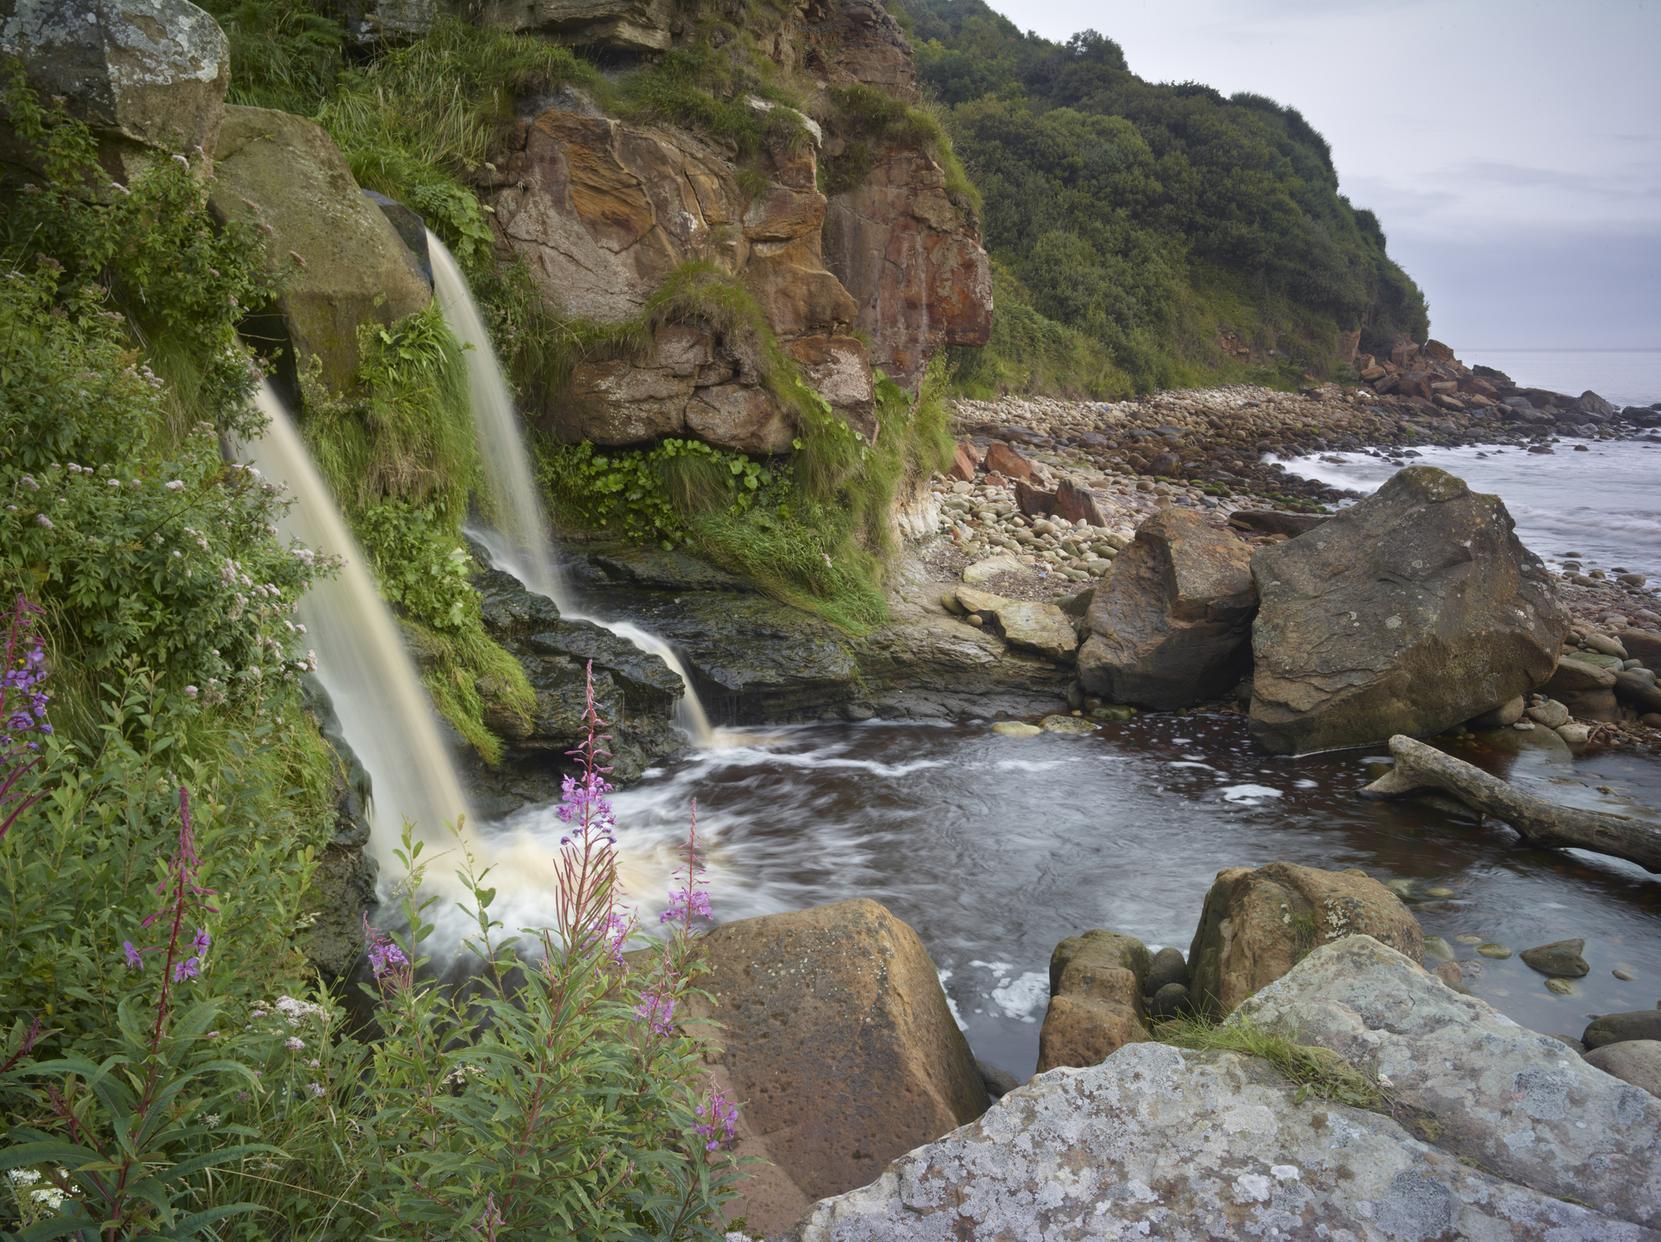 The beach and waterfall at Hayburn Wyke is a relatively private spot providing a beautiful place to propose with less chance of others interrupting. Theres also a pub close by for celebrations (hopefully!) afterwards.